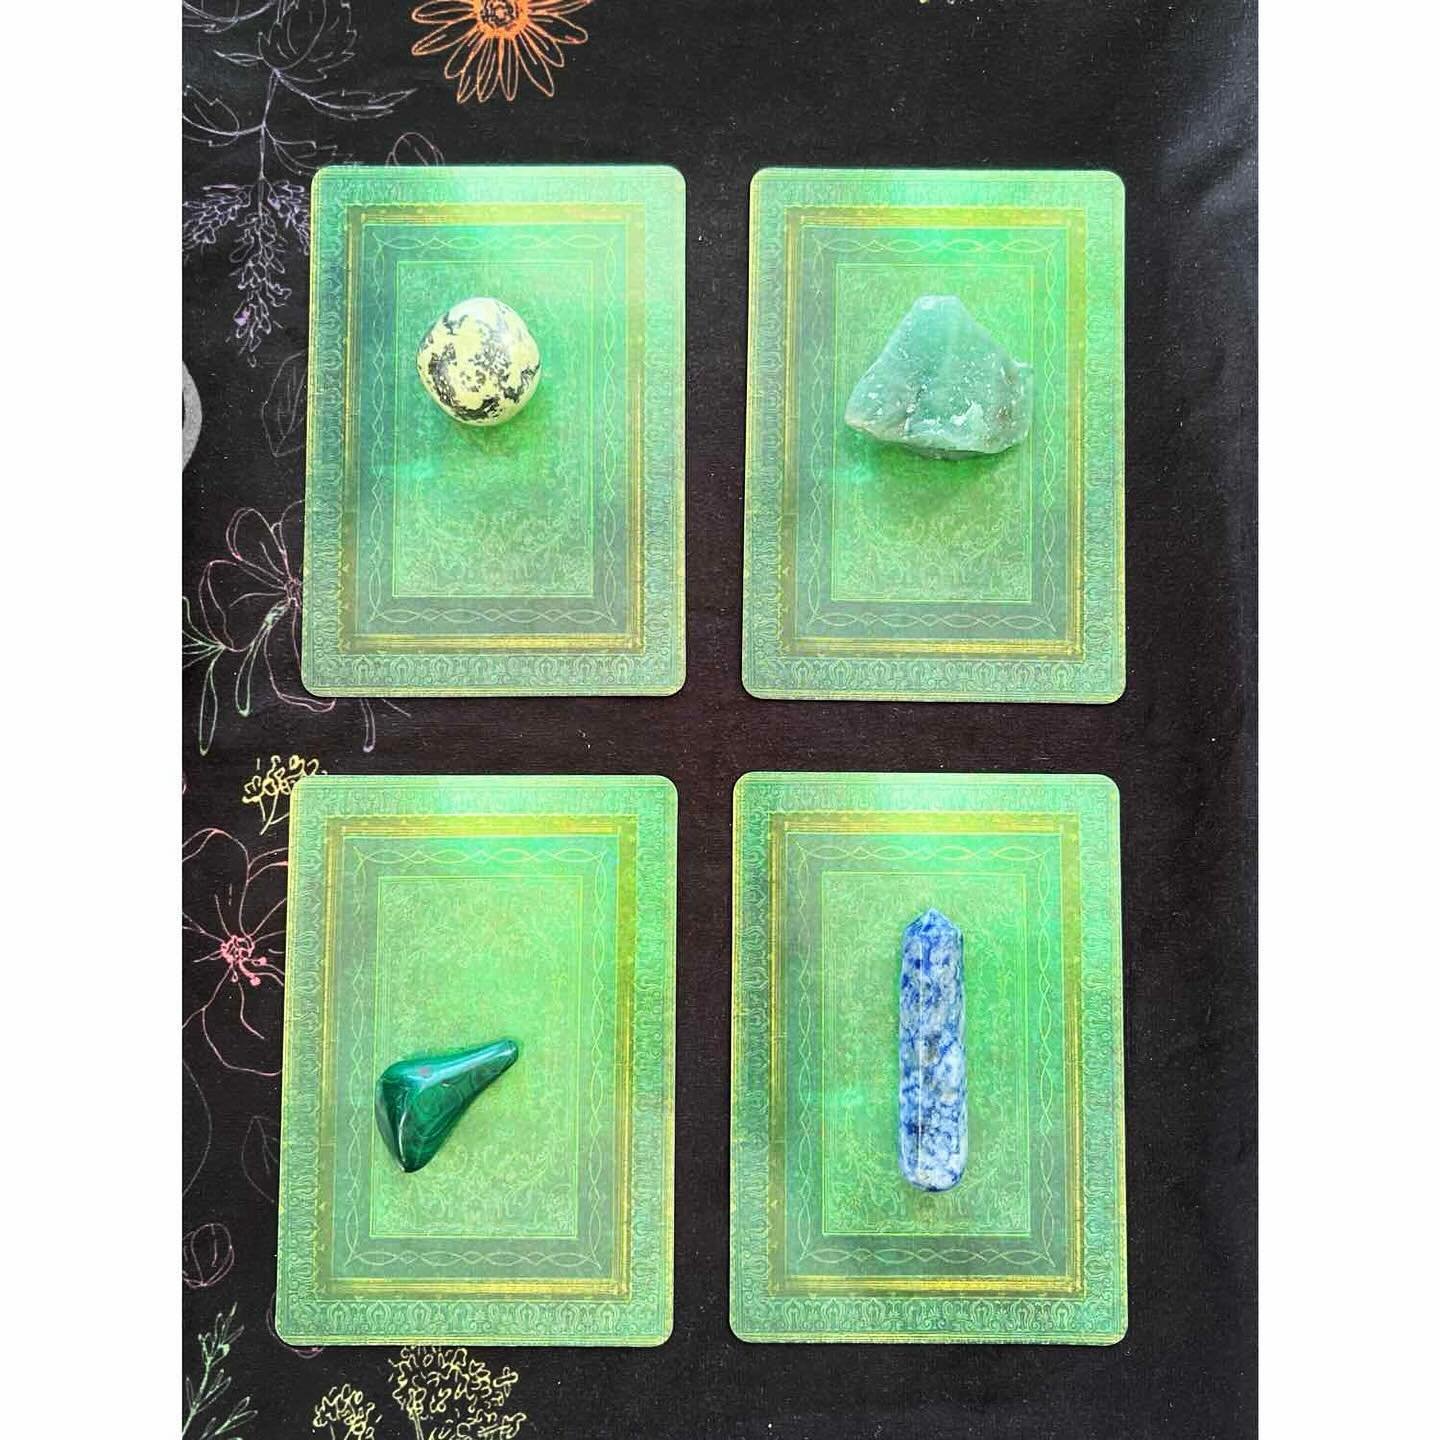 What should you focus on during the energy of this
full moon? 

You can pick the card/crystal that you are most intuitively drawn to for your message. 

Take a moment to choose the card / crystal that calls most to you. Scroll through for your messag